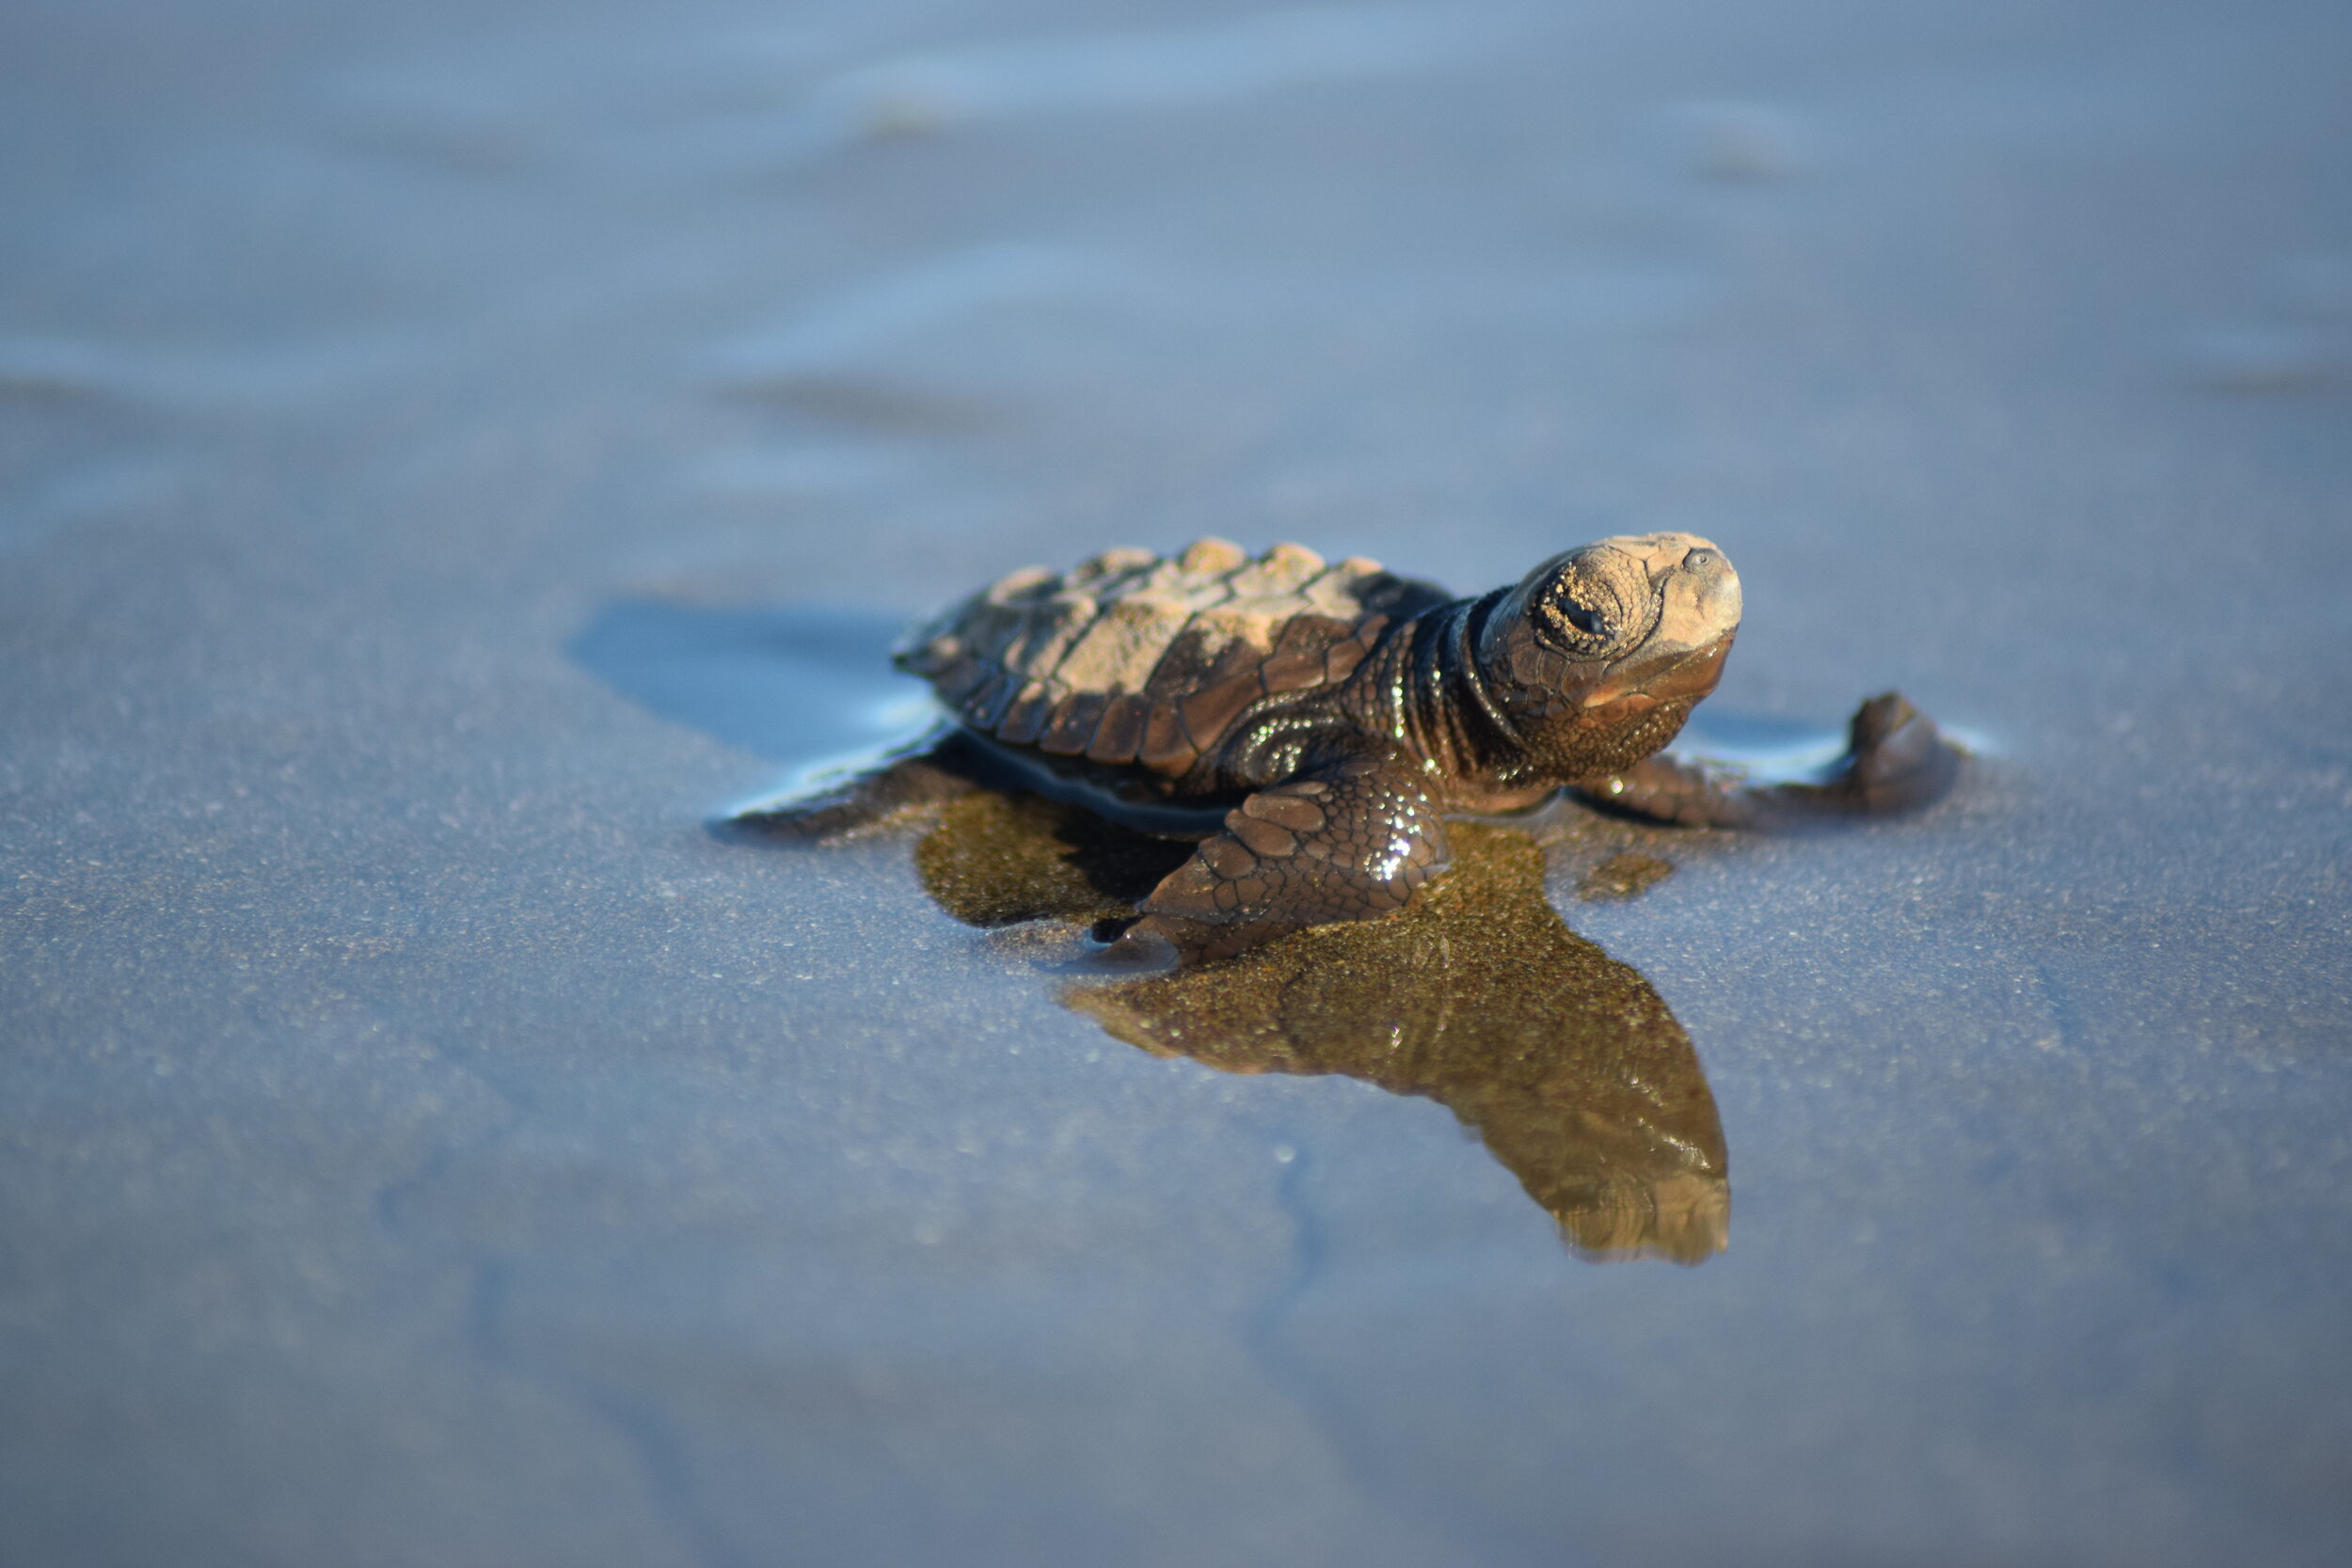 Olive ridley hatchling from Nicaragua (photo: Sos Nicaragua)